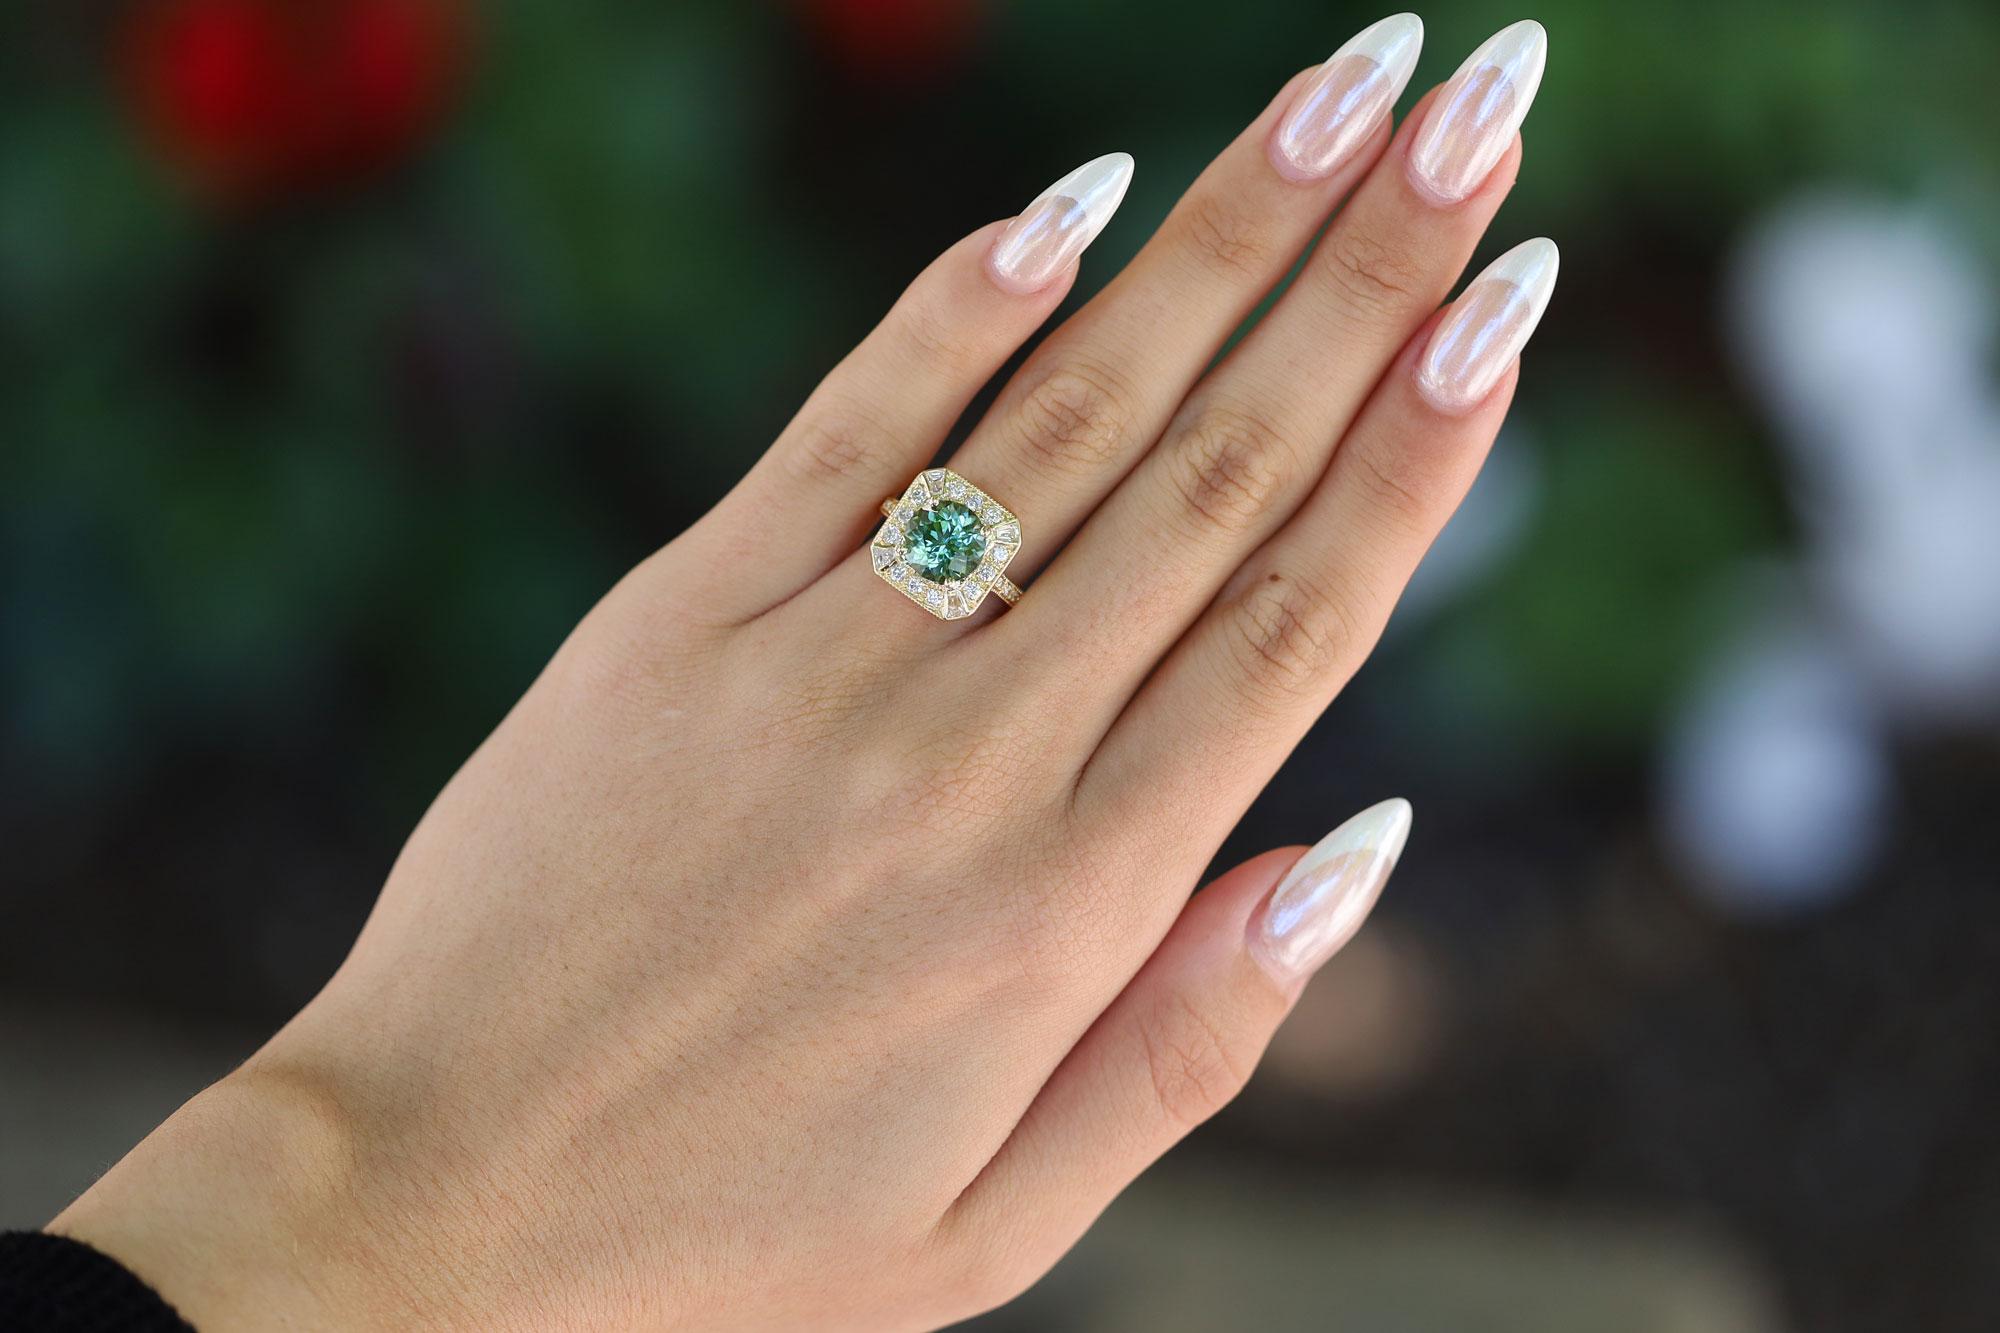 Centered by a captivating, vivid mint green tourmaline, this alluring gemstone engagement ring postures a striking statement. A vintage heirloom bringing 80's glam and an Art Deco architectural aesthetic to your hand. The octagon geometric shape is